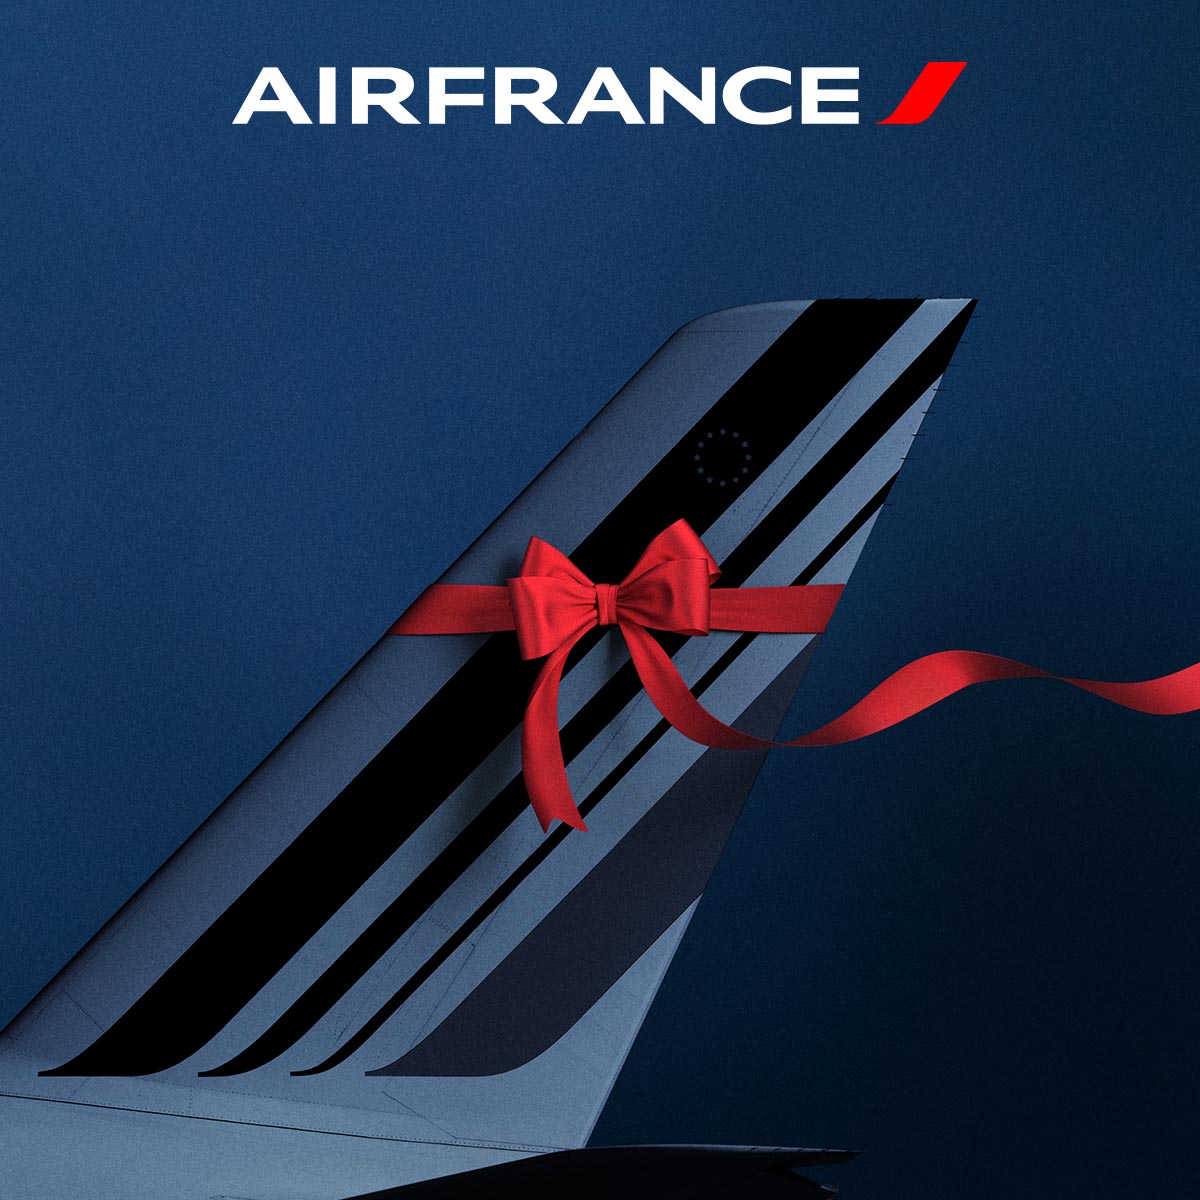 get_the_best_Air France_ad